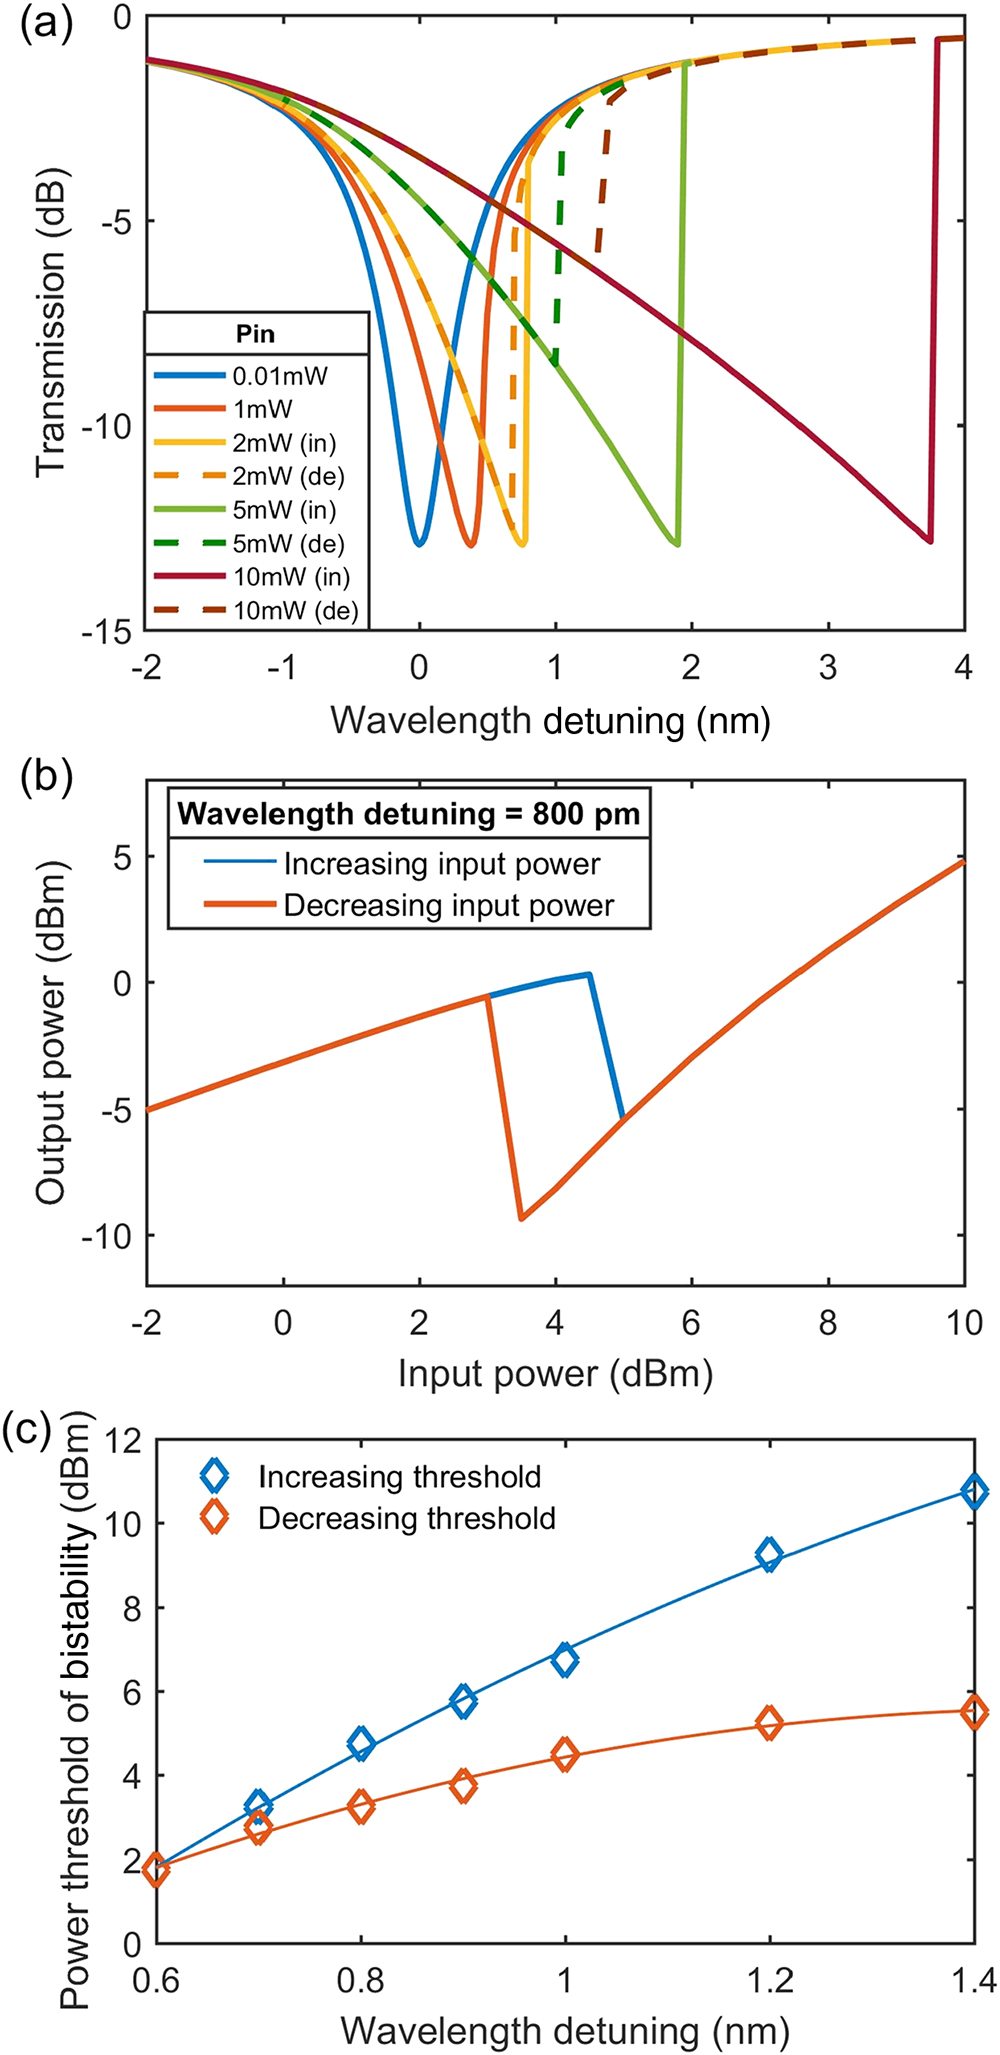 Simulation results of the 2 µm MRR under bistability. (a) The calculated output power spectra at different input powers, (b) the hysteresis loop presenting the relationships between output power and input power at a fixed wavelength detuning, (c) power threshold of bistability in a 2 µm ring.